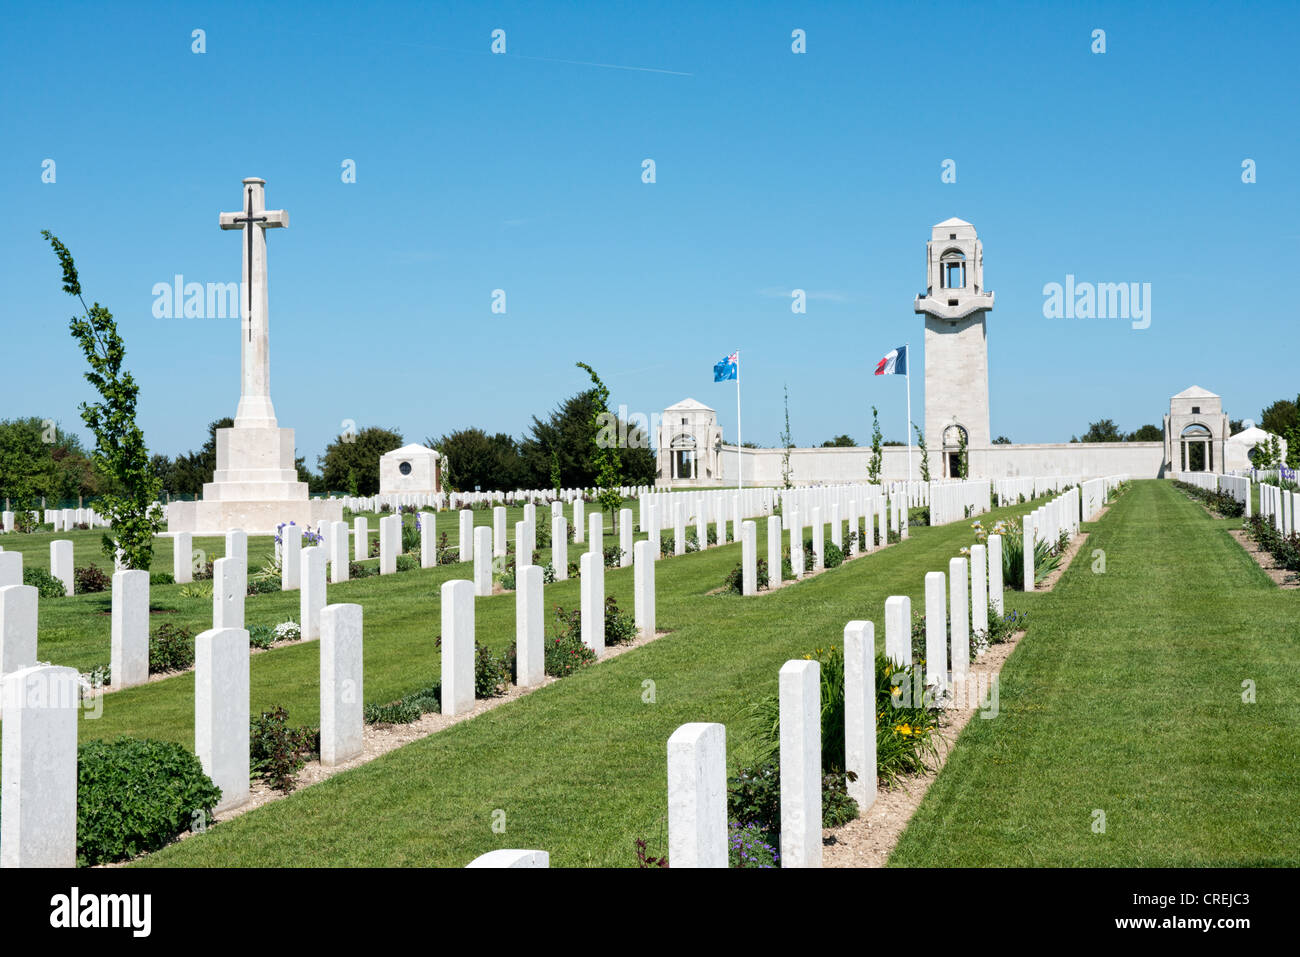 A view of the tower, cross of sacrifice & cemetery at the WW1 Australian National Memorial at Villers-Bretonneux, Somme, France Stock Photo